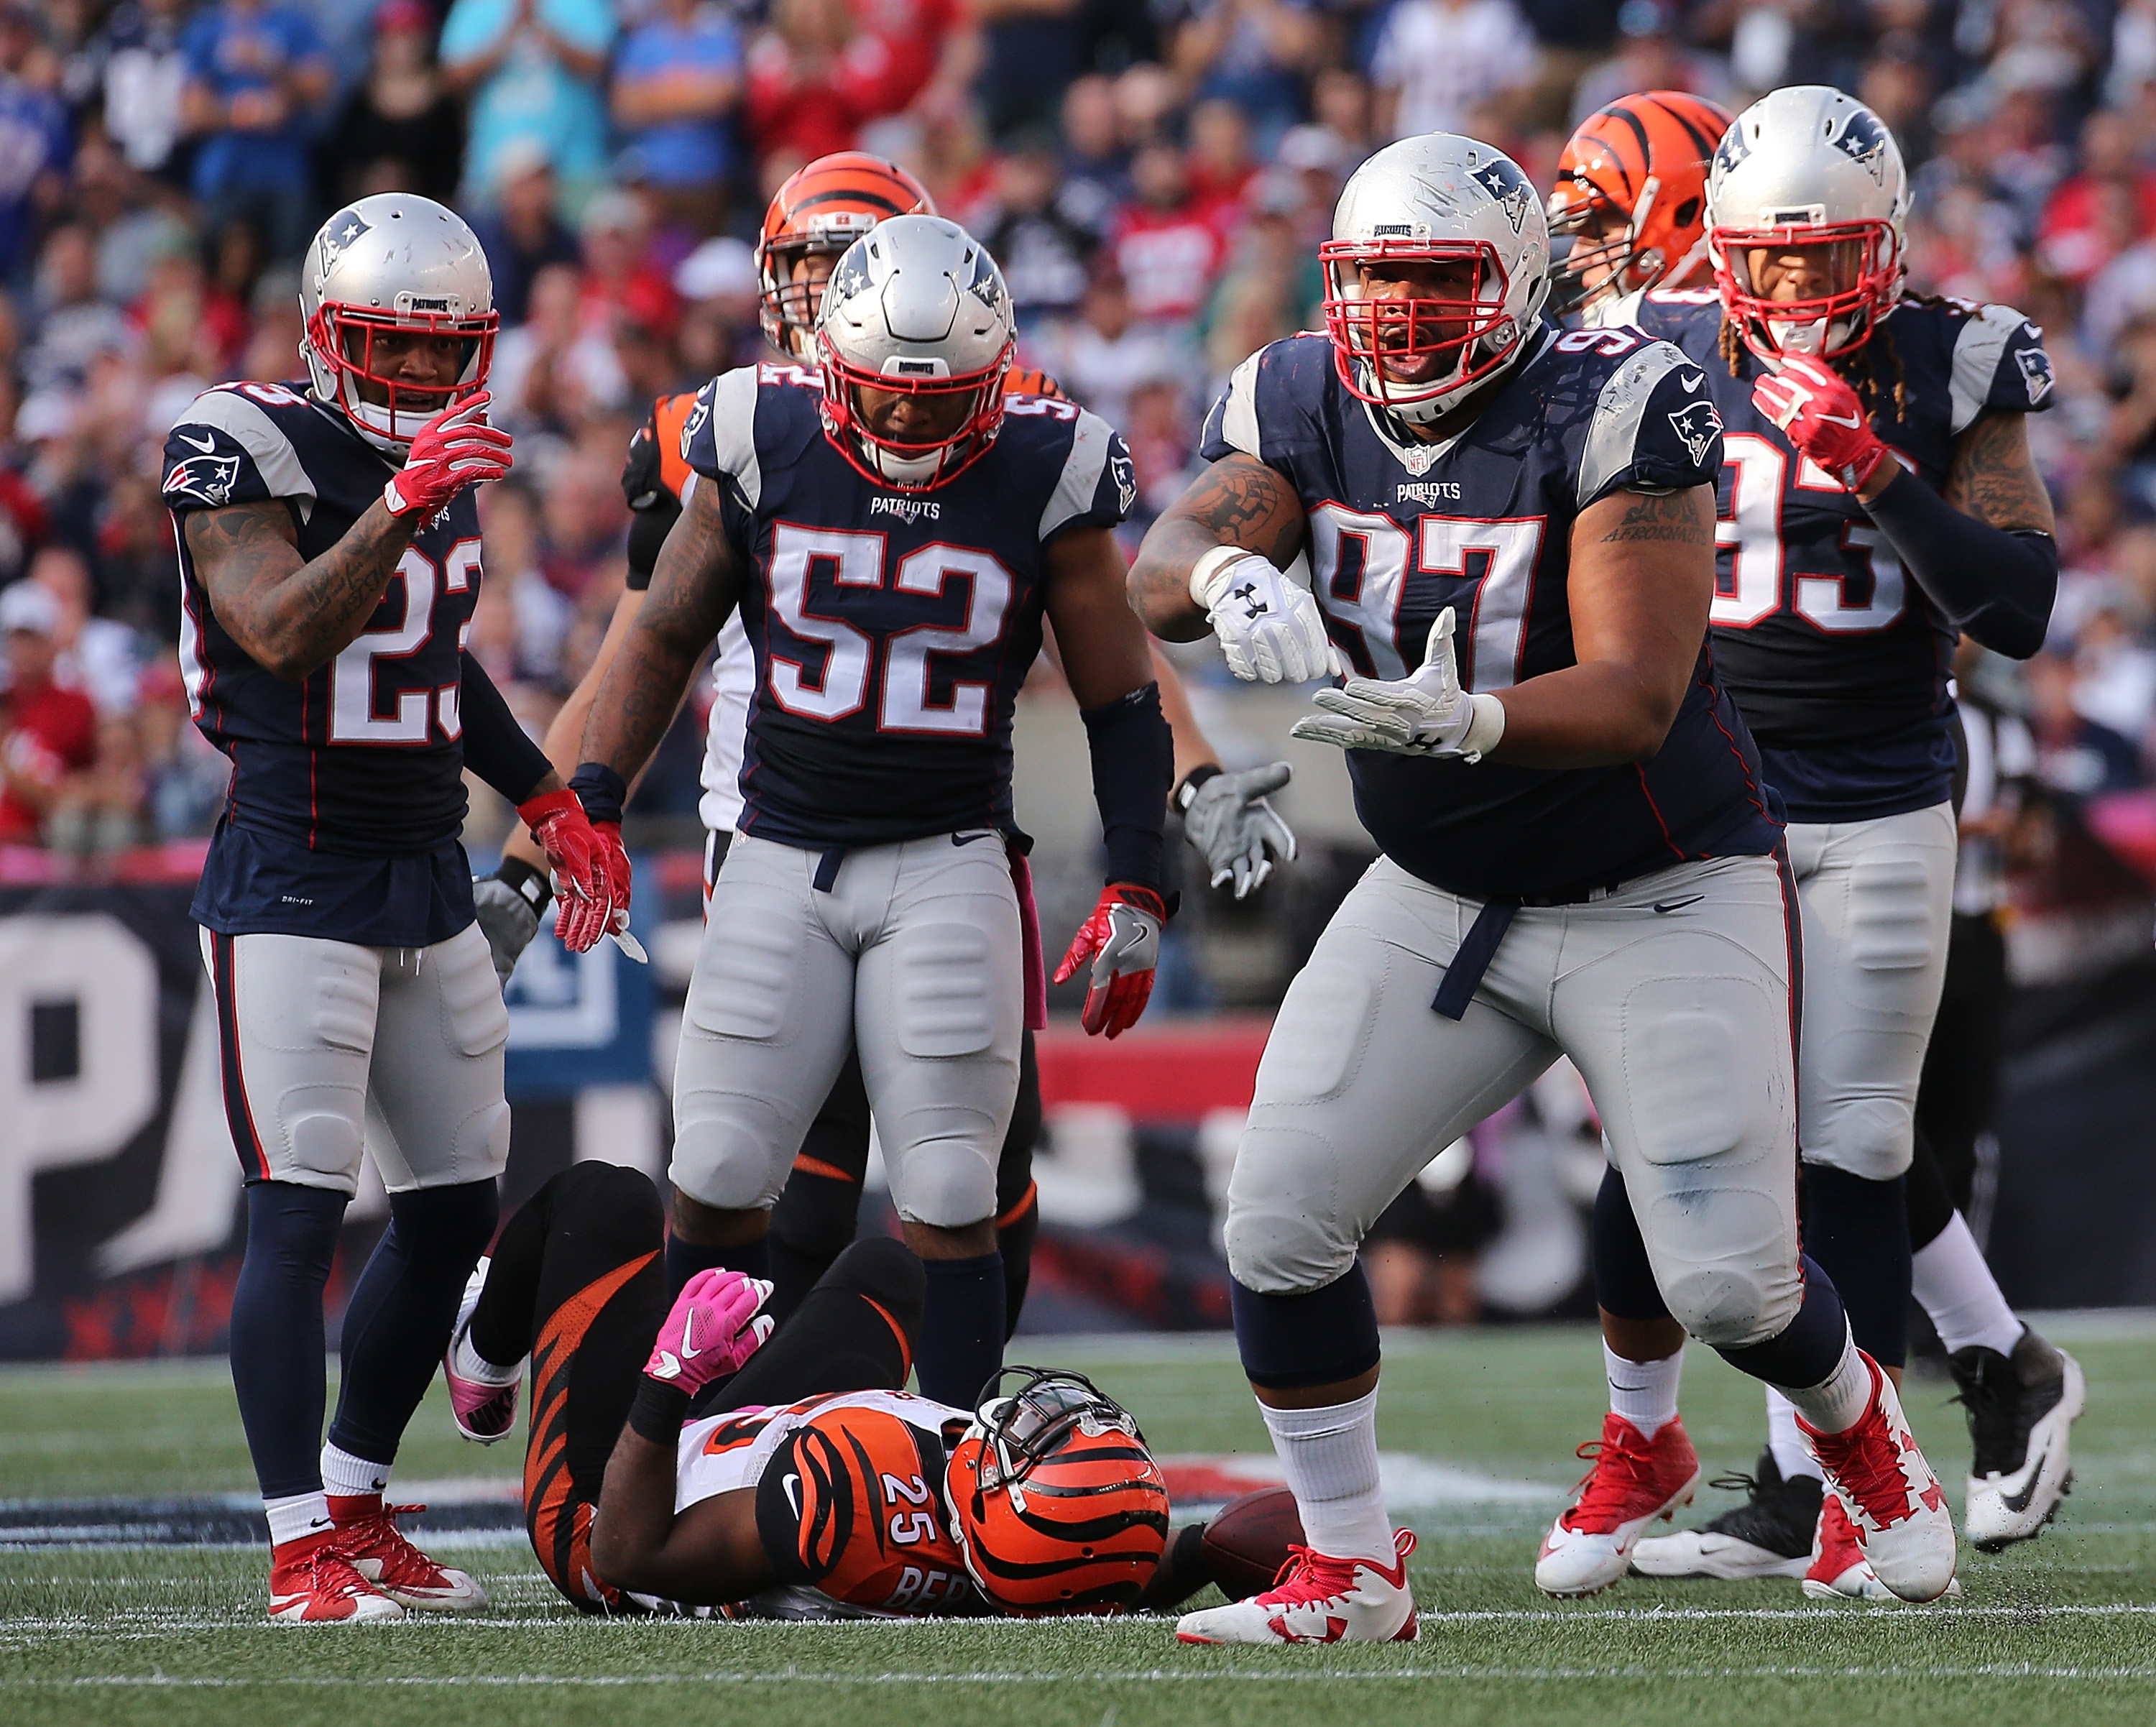 Alan Branch reacts after stopping Giovani Bernard of the Cincinnati Bengals. (Photo by Jim Rogash/Getty Images)